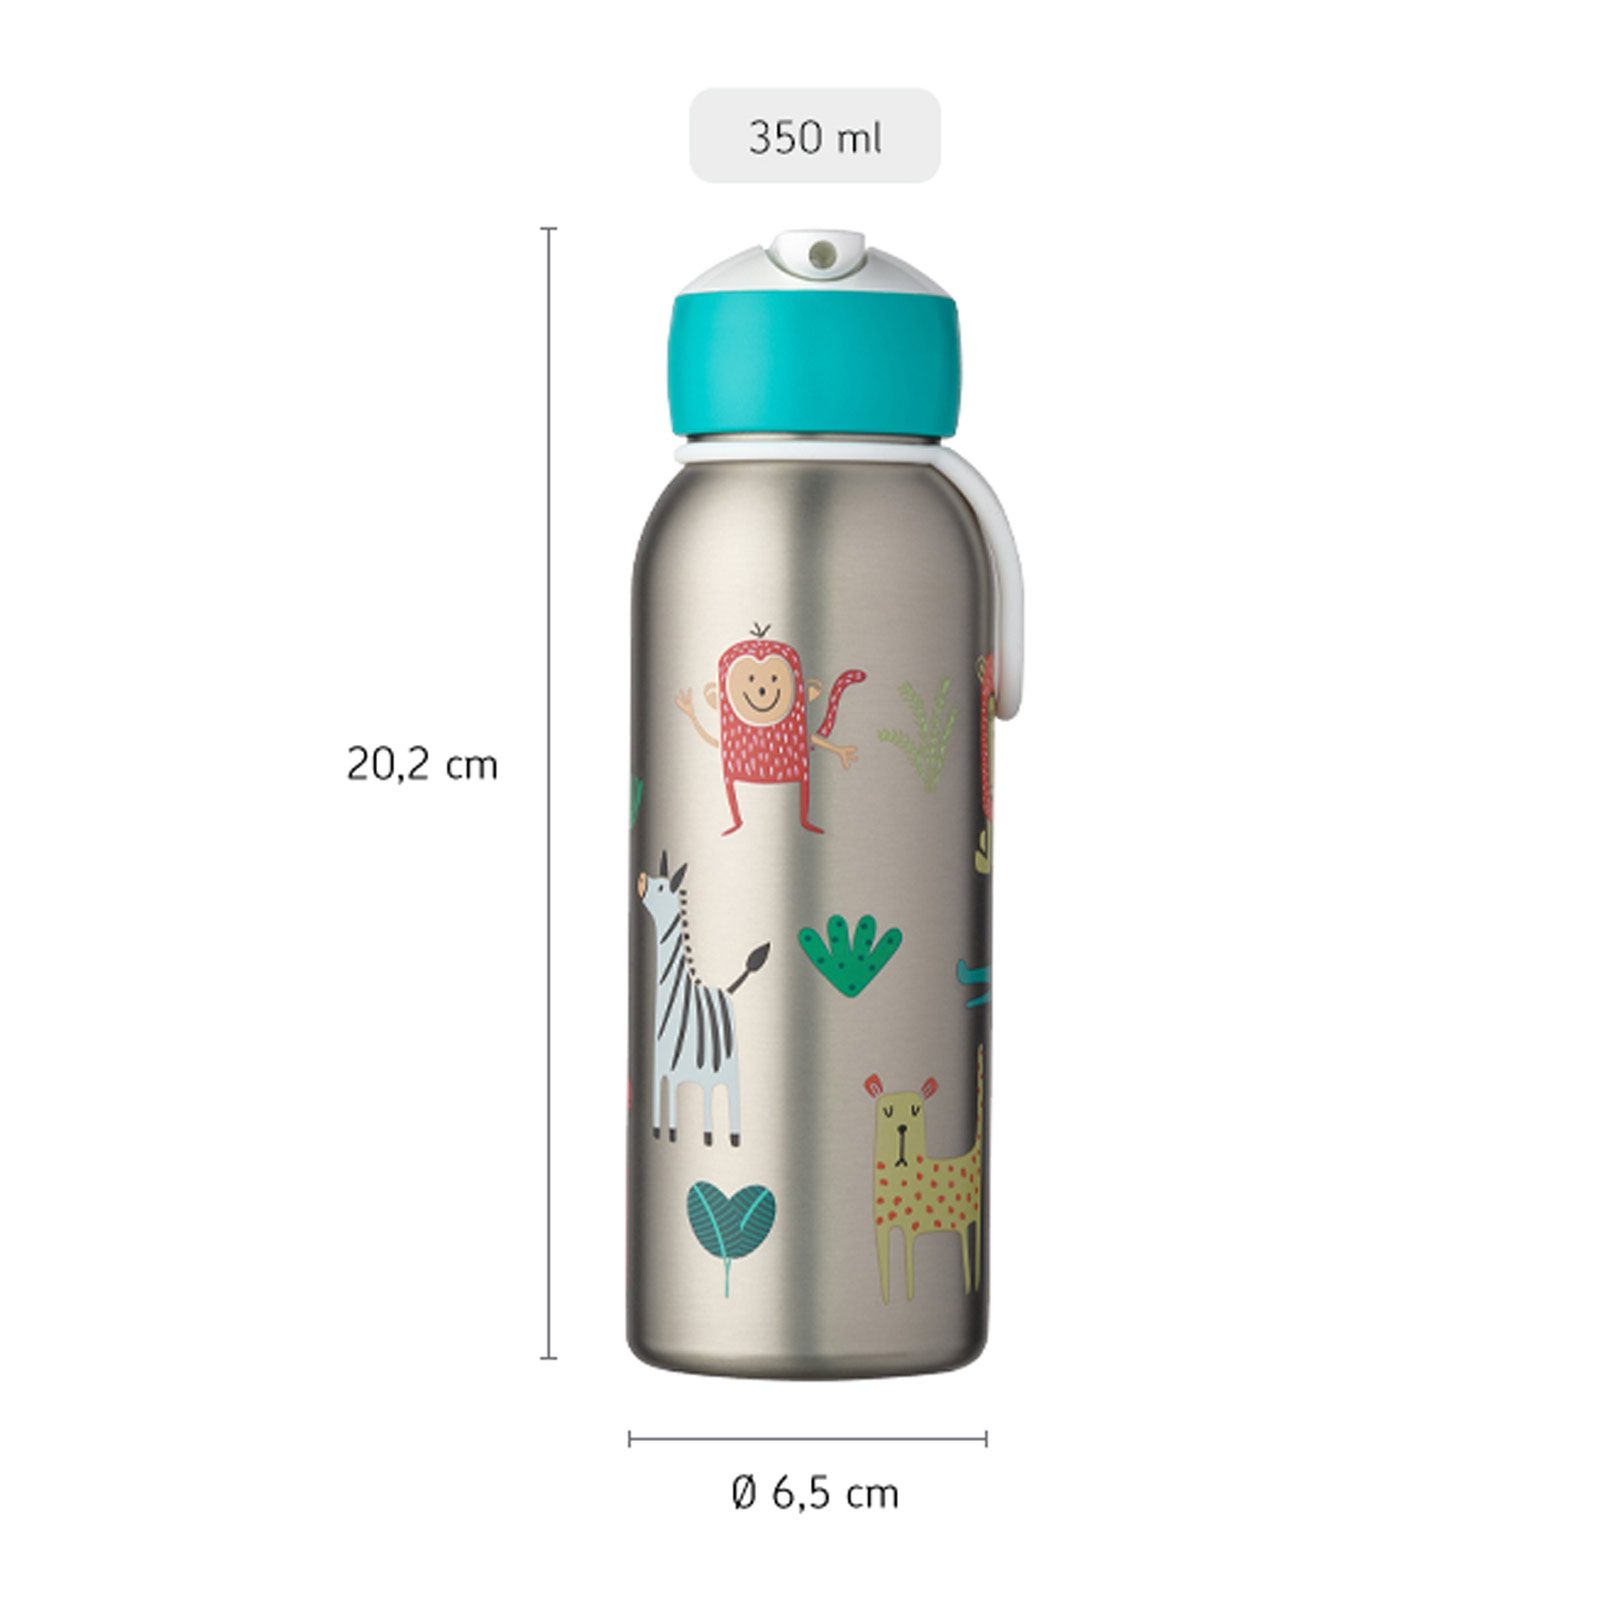 Mepal CAMPUS Thermoflasche Flip-Up 350 ml turquoise - A 